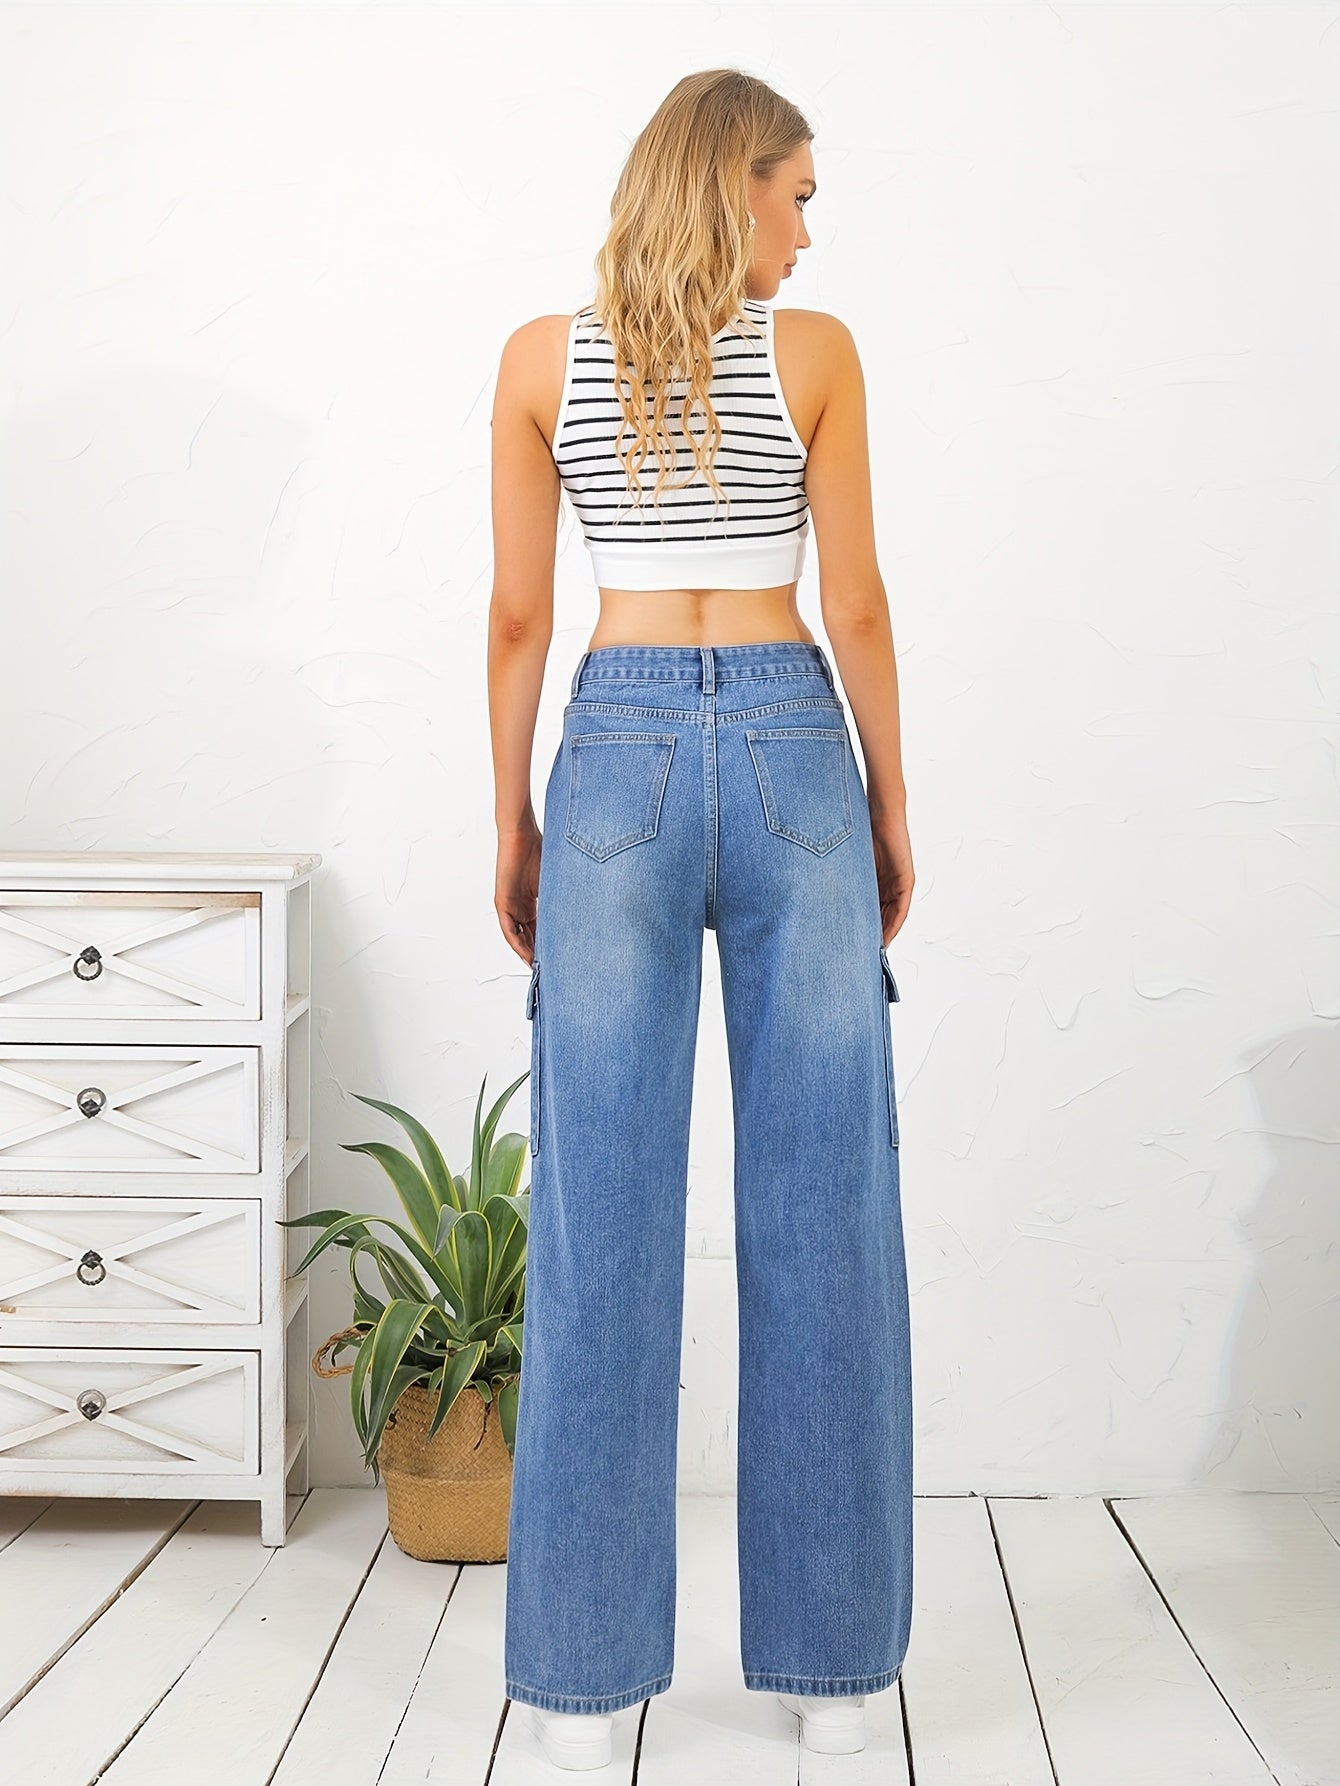 「lovevop」Flap Cargo Pocket Whiskering Denim Pants, Water Ripple Embossed Crotch Loose Straight Leg Jeans, Causal Pants For Every Day, Women's Denim Jeans & Clothing